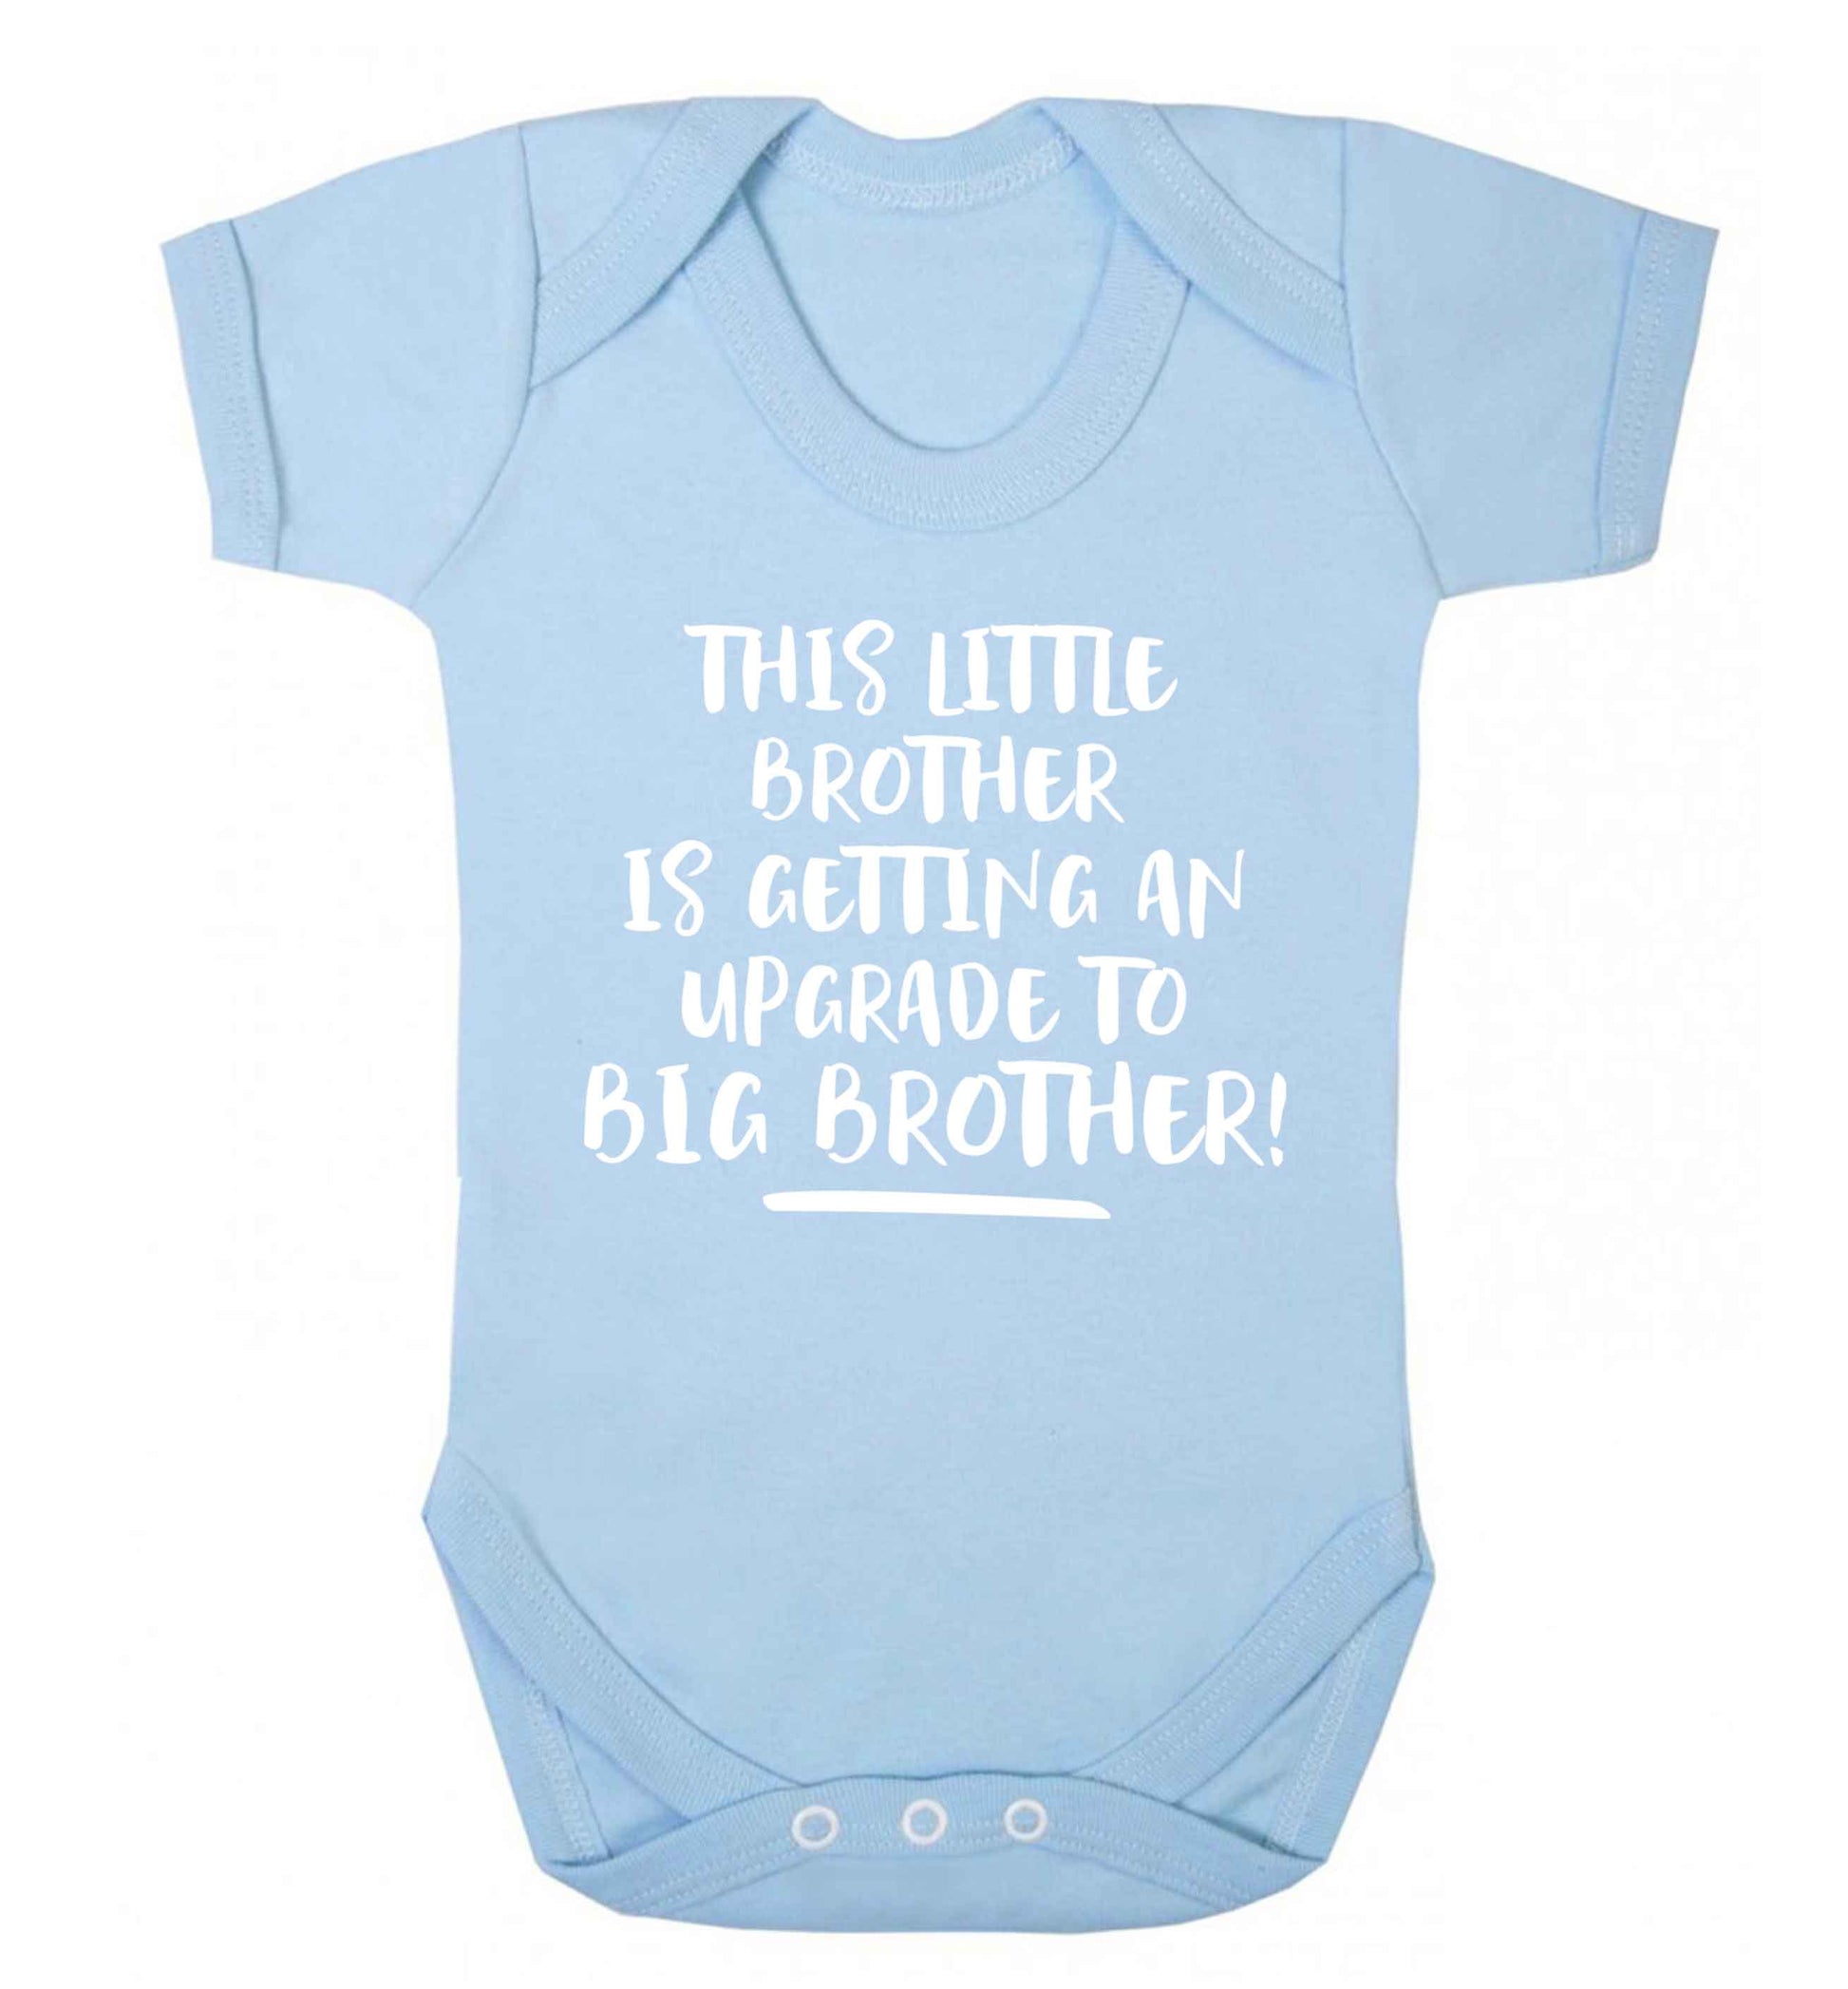 This little brother is getting an upgrade to big brother! Baby Vest pale blue 18-24 months